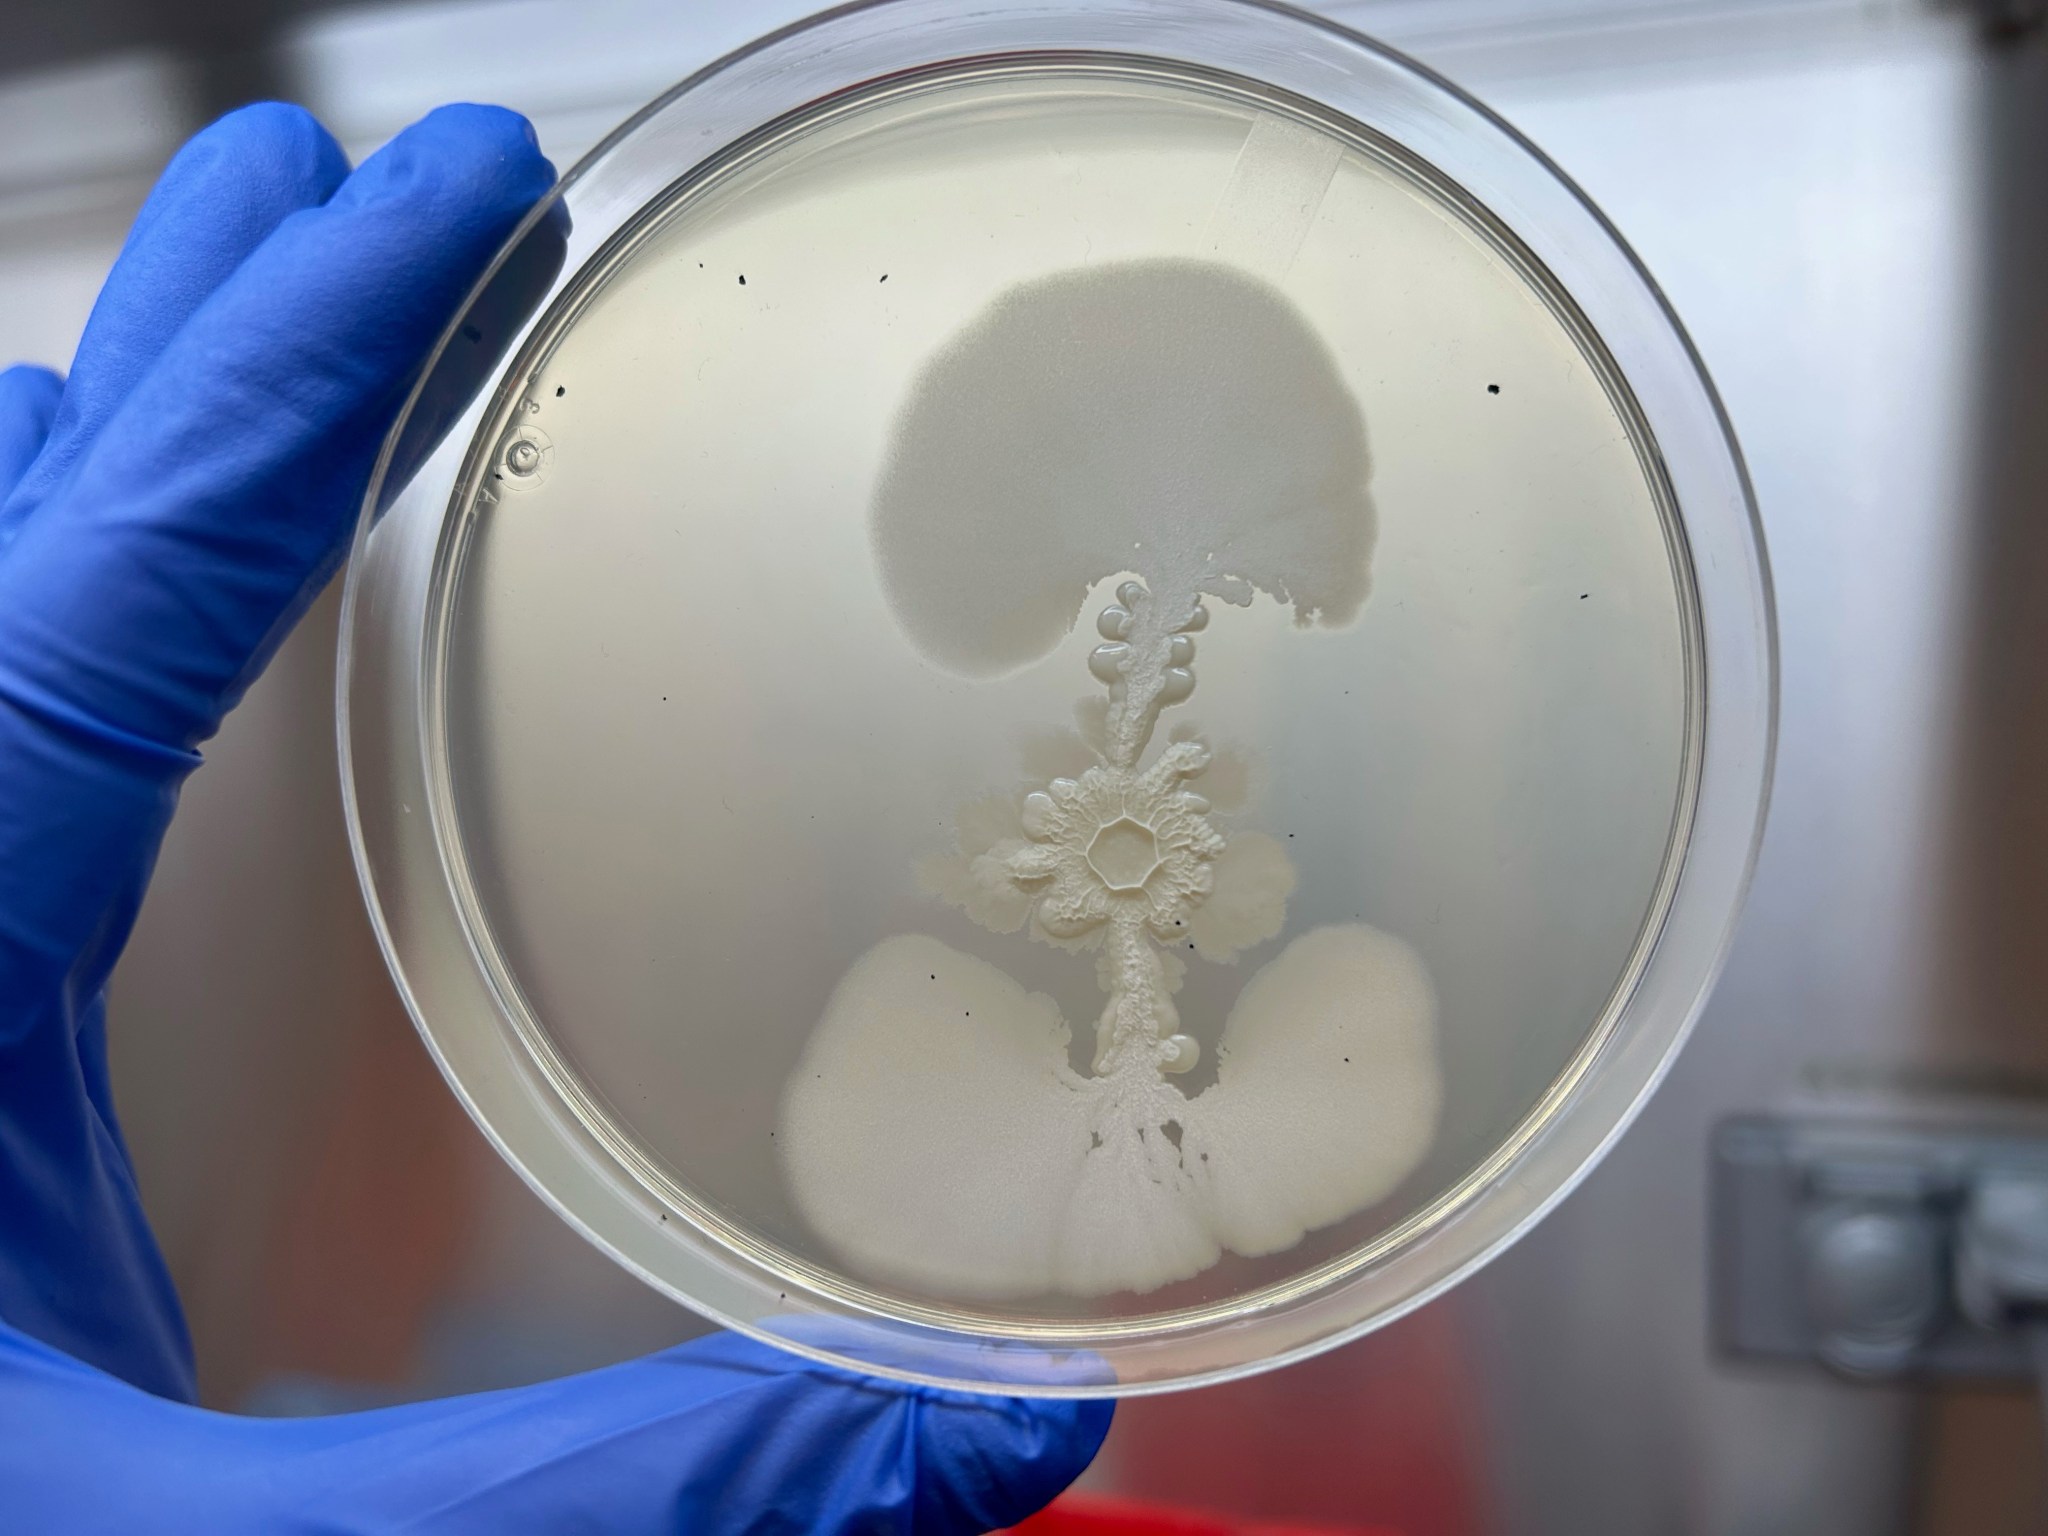 A gloved hand holds a Petri dish that appears to have a white specimen. It appears to look like a skull, spine, and hip bones in the photo that are all white.